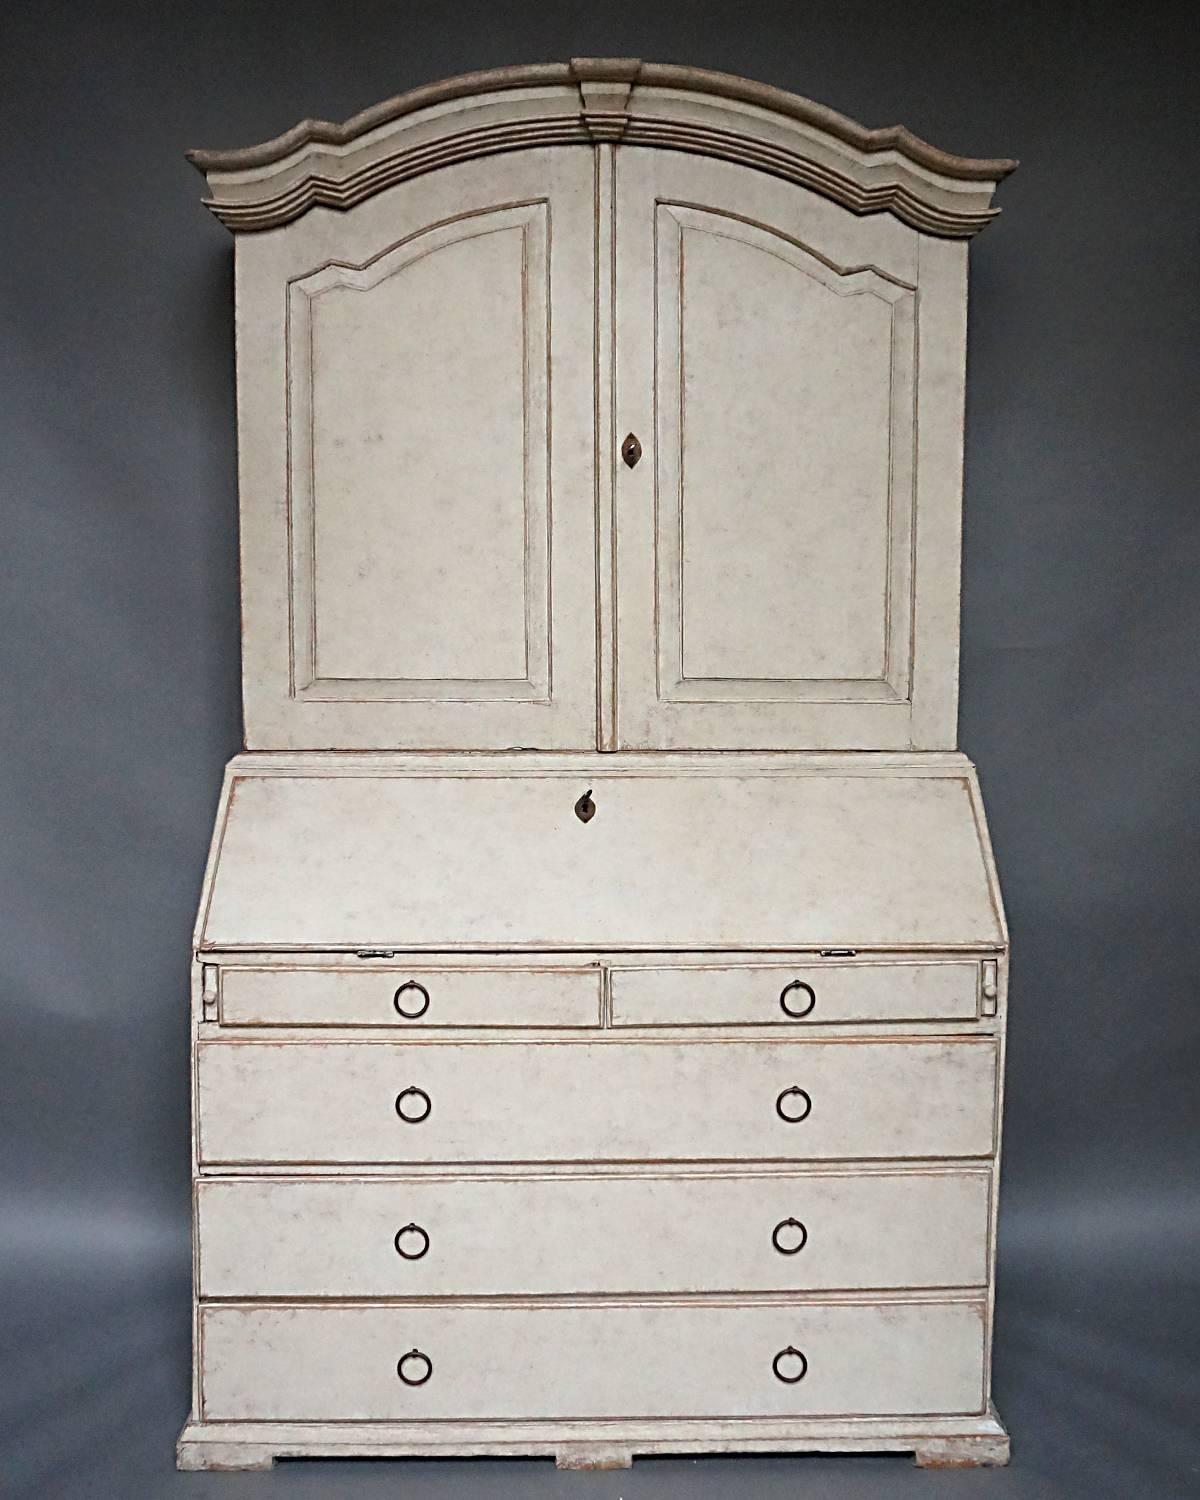 Period Baroque secretary, Sweden, circa 1800, in two parts. The library section has an arched cornice with keystone detail over raised panel doors. The interior has three fixed shelves, the top shaped for spoons.

The lower section has a fitted